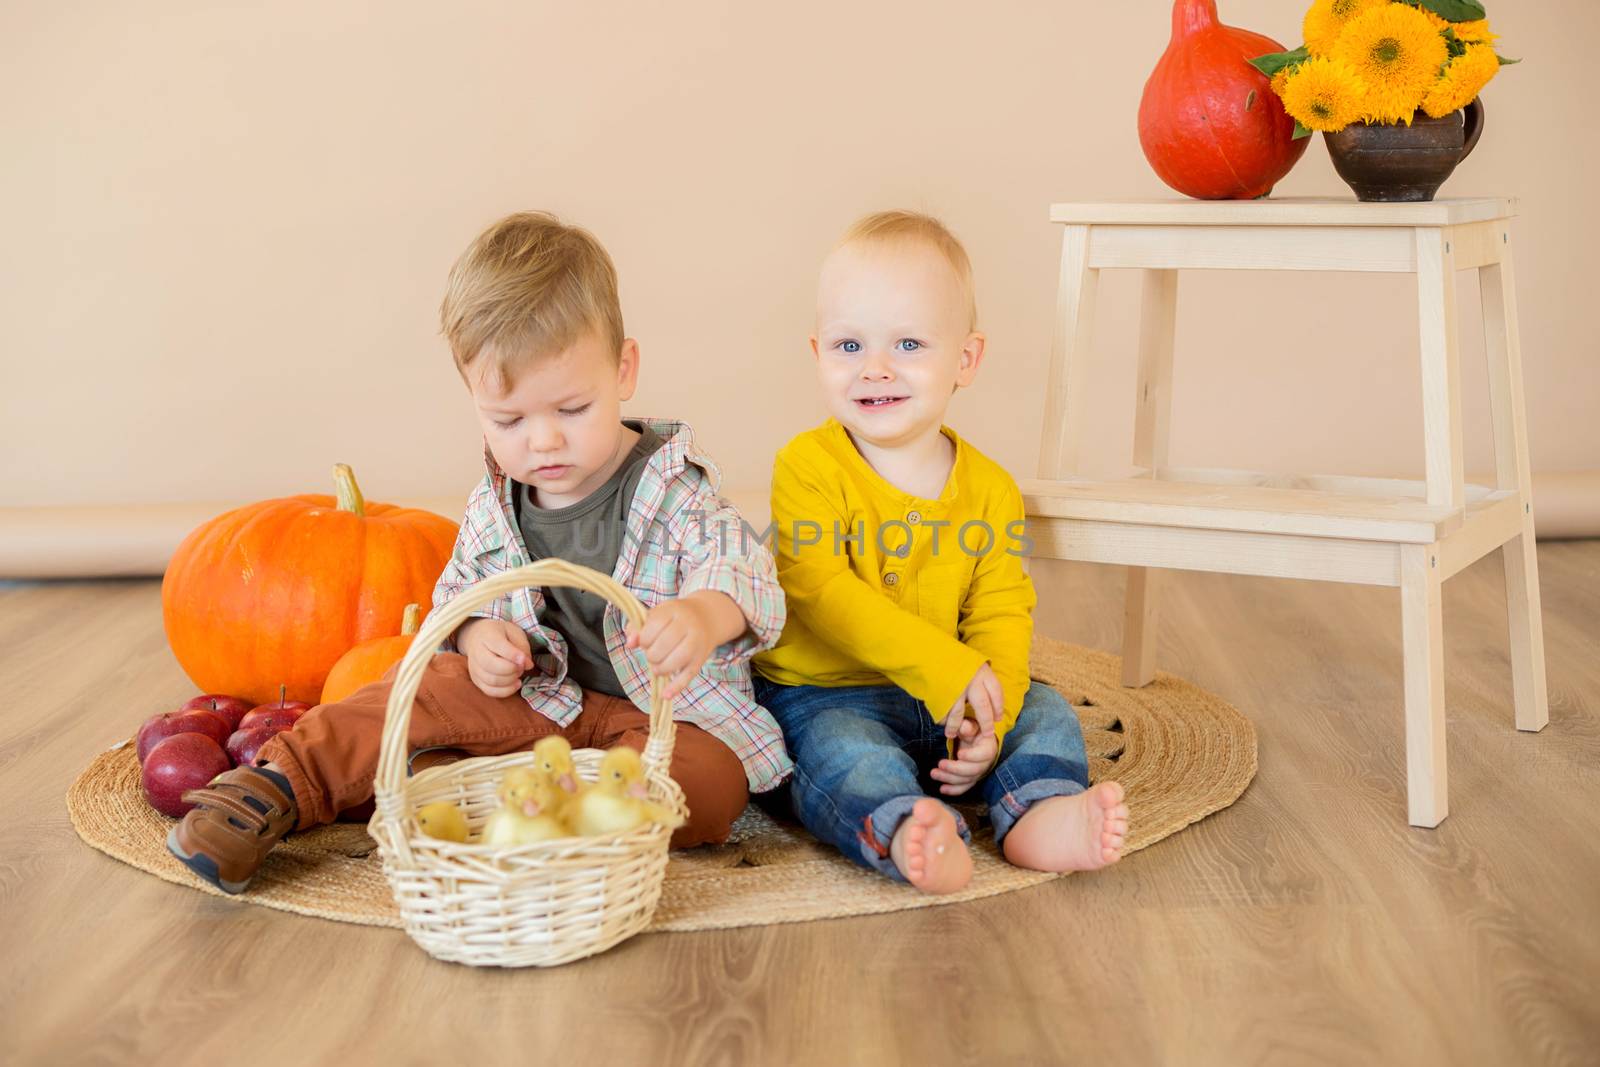 .Kids sit among pumpkins with a basket of ducklings